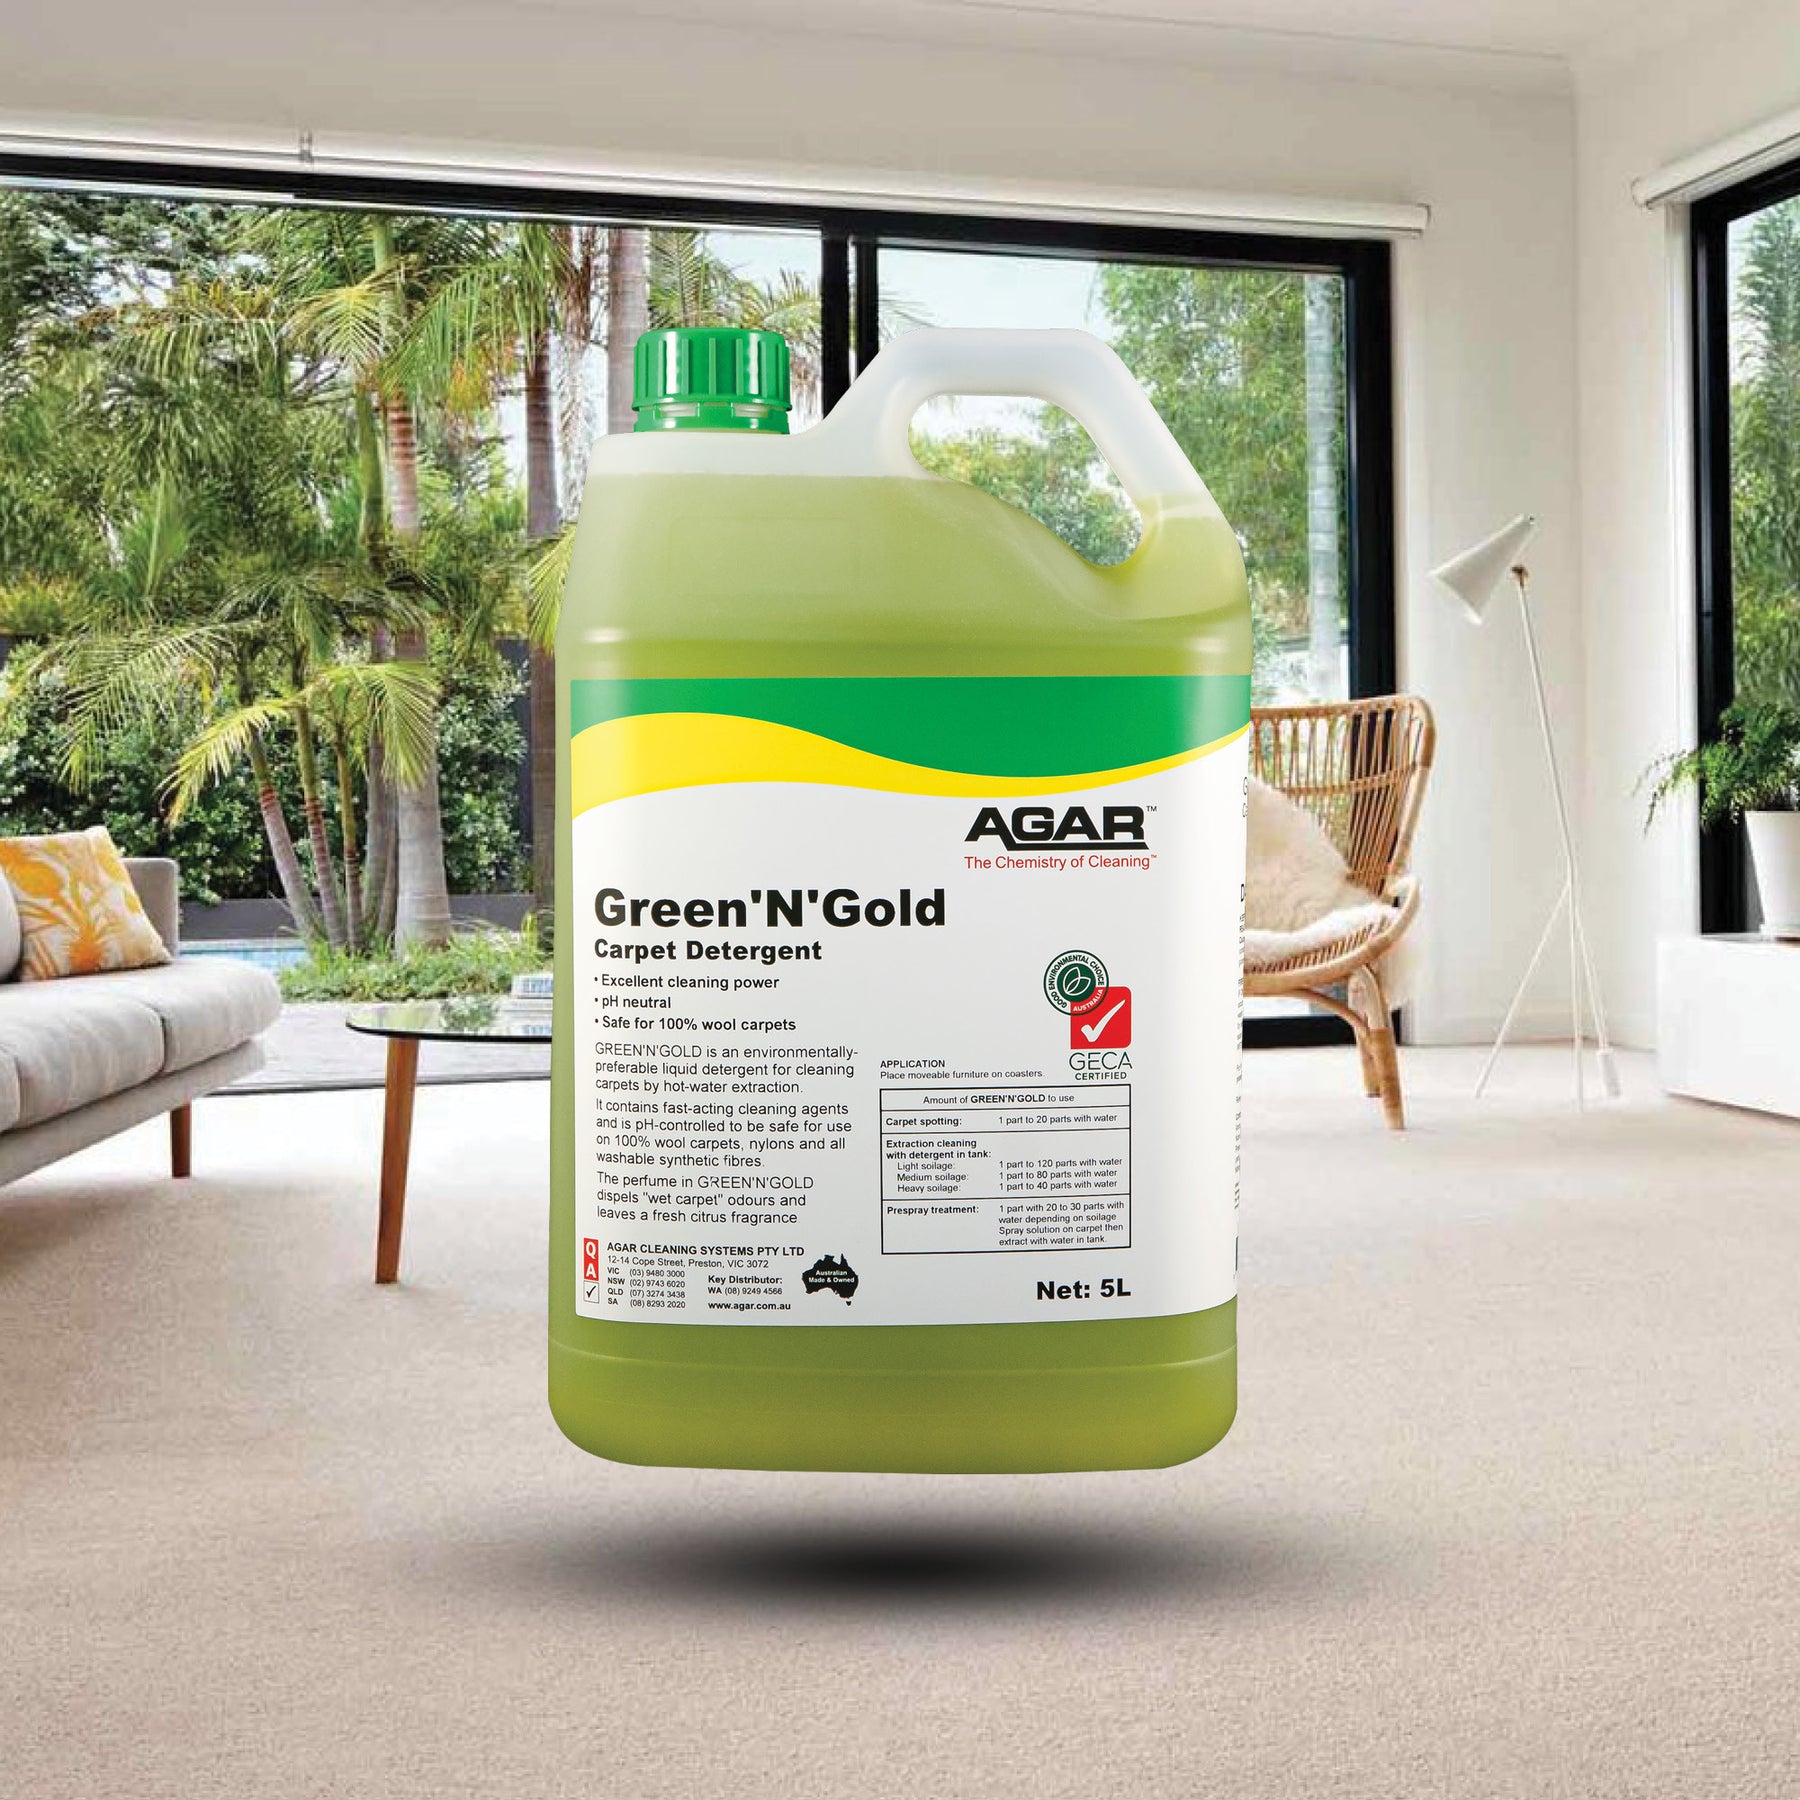 Greener Carpet Cleaning with Agar